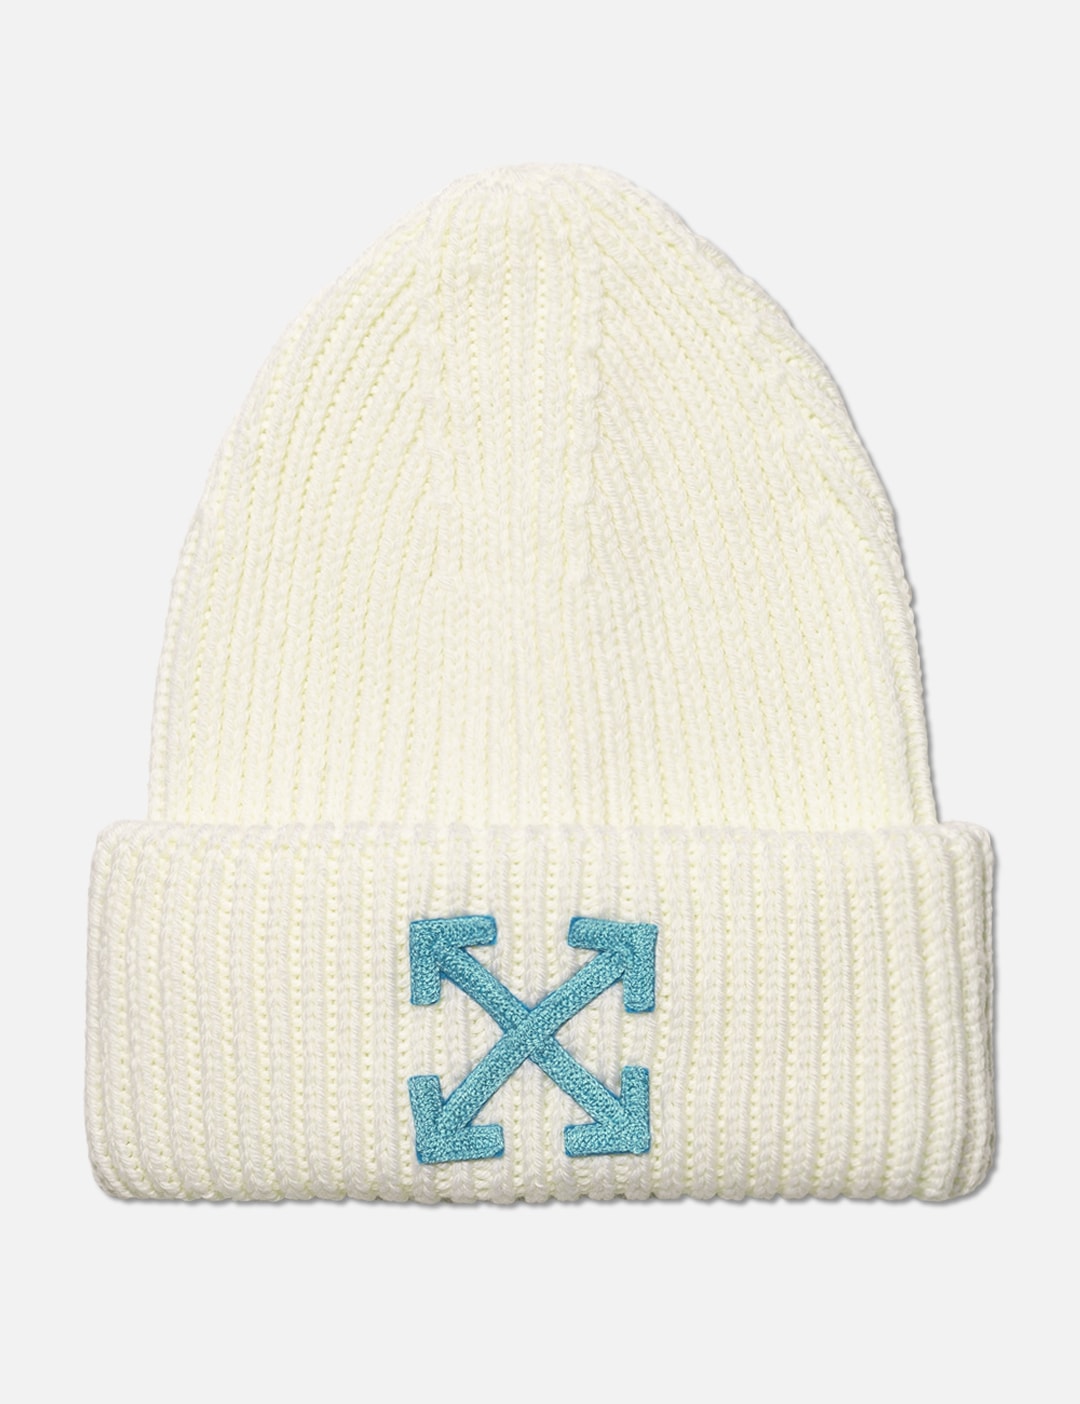 ARROW RIBBED BEANIE Placeholder Image